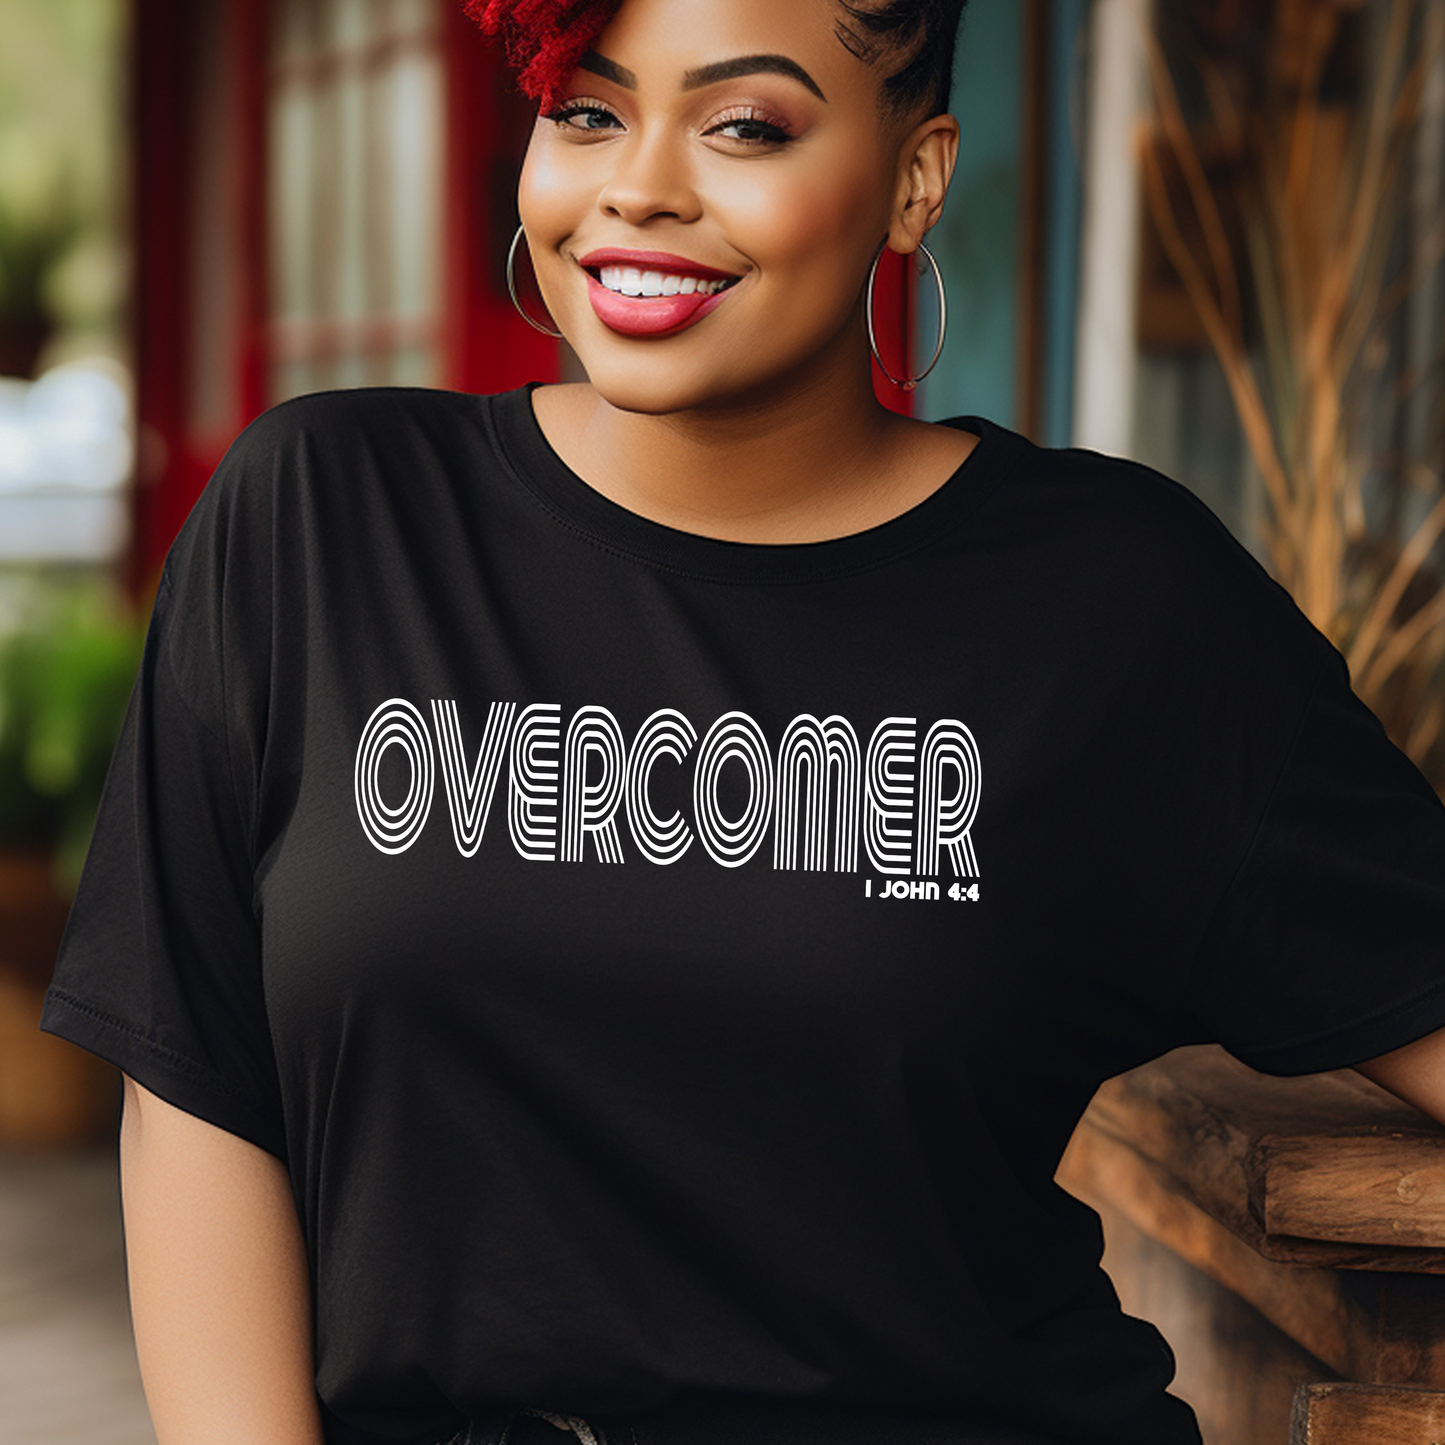 Striking black Overcomer t-shirt presented by Triumph Tees, inspired by 1 John 4:4, promoting our status as overcomers through God. This faith-centric apparel is a sleek representation of spiritual resilience.